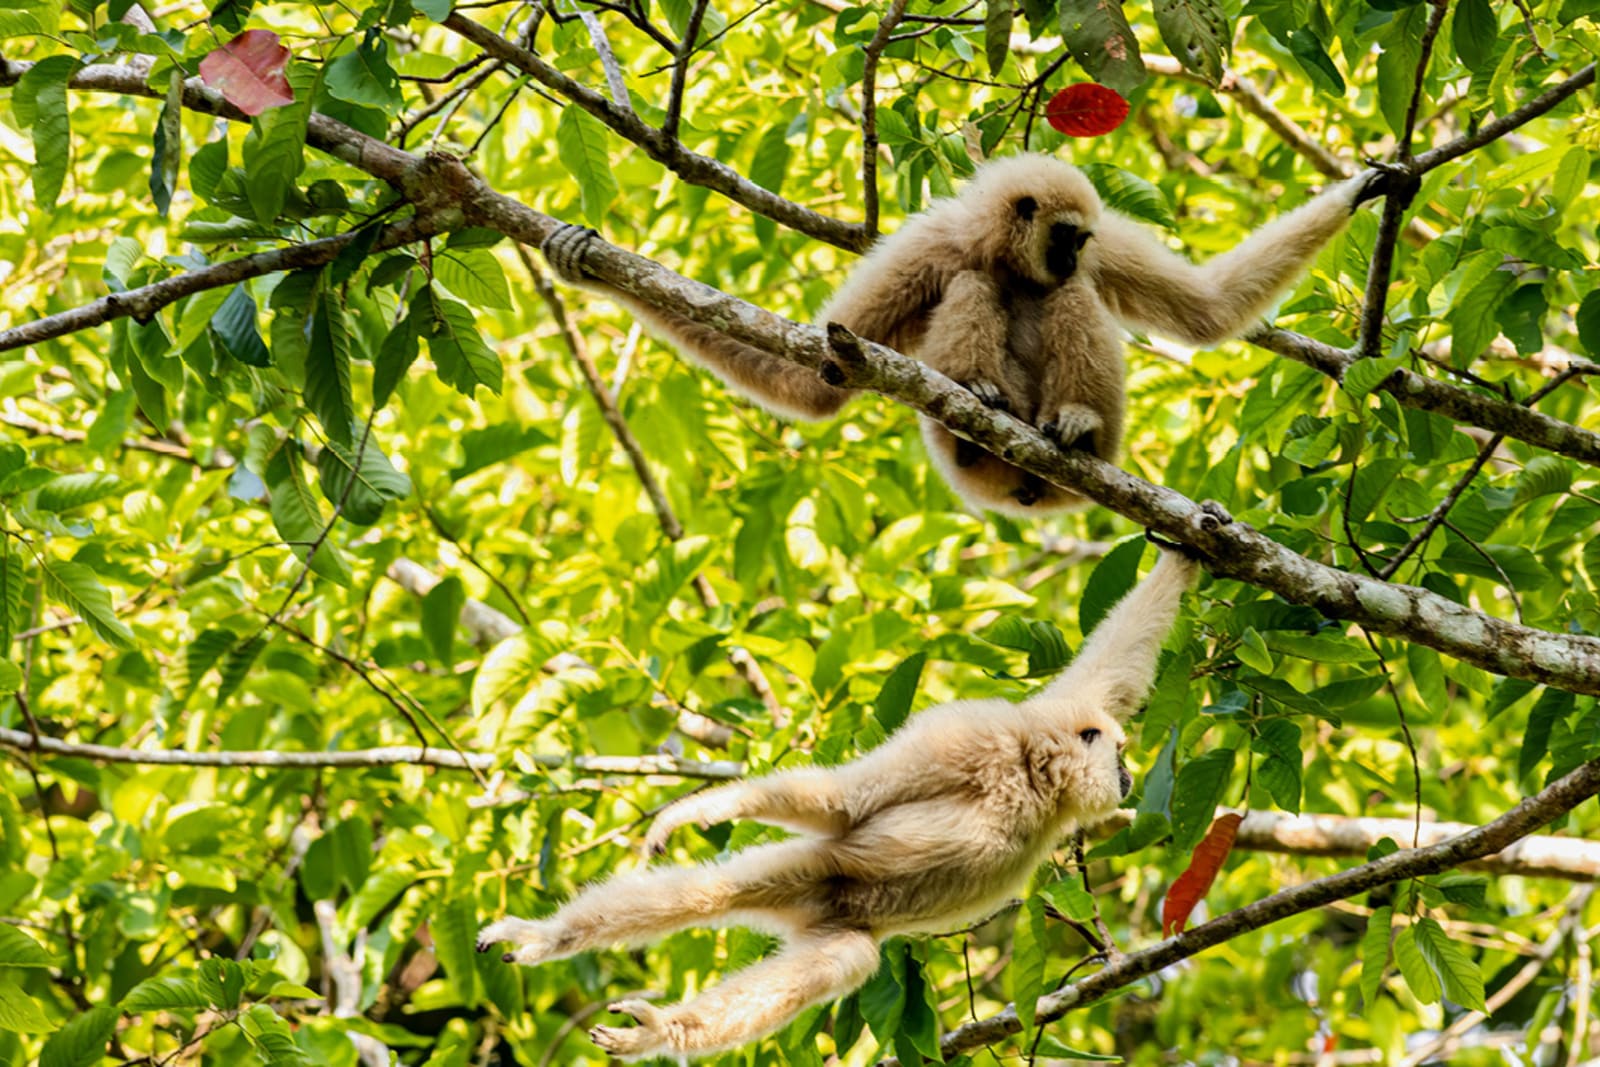 Gibbon monkeys sitting in and swinging from a leafy tree